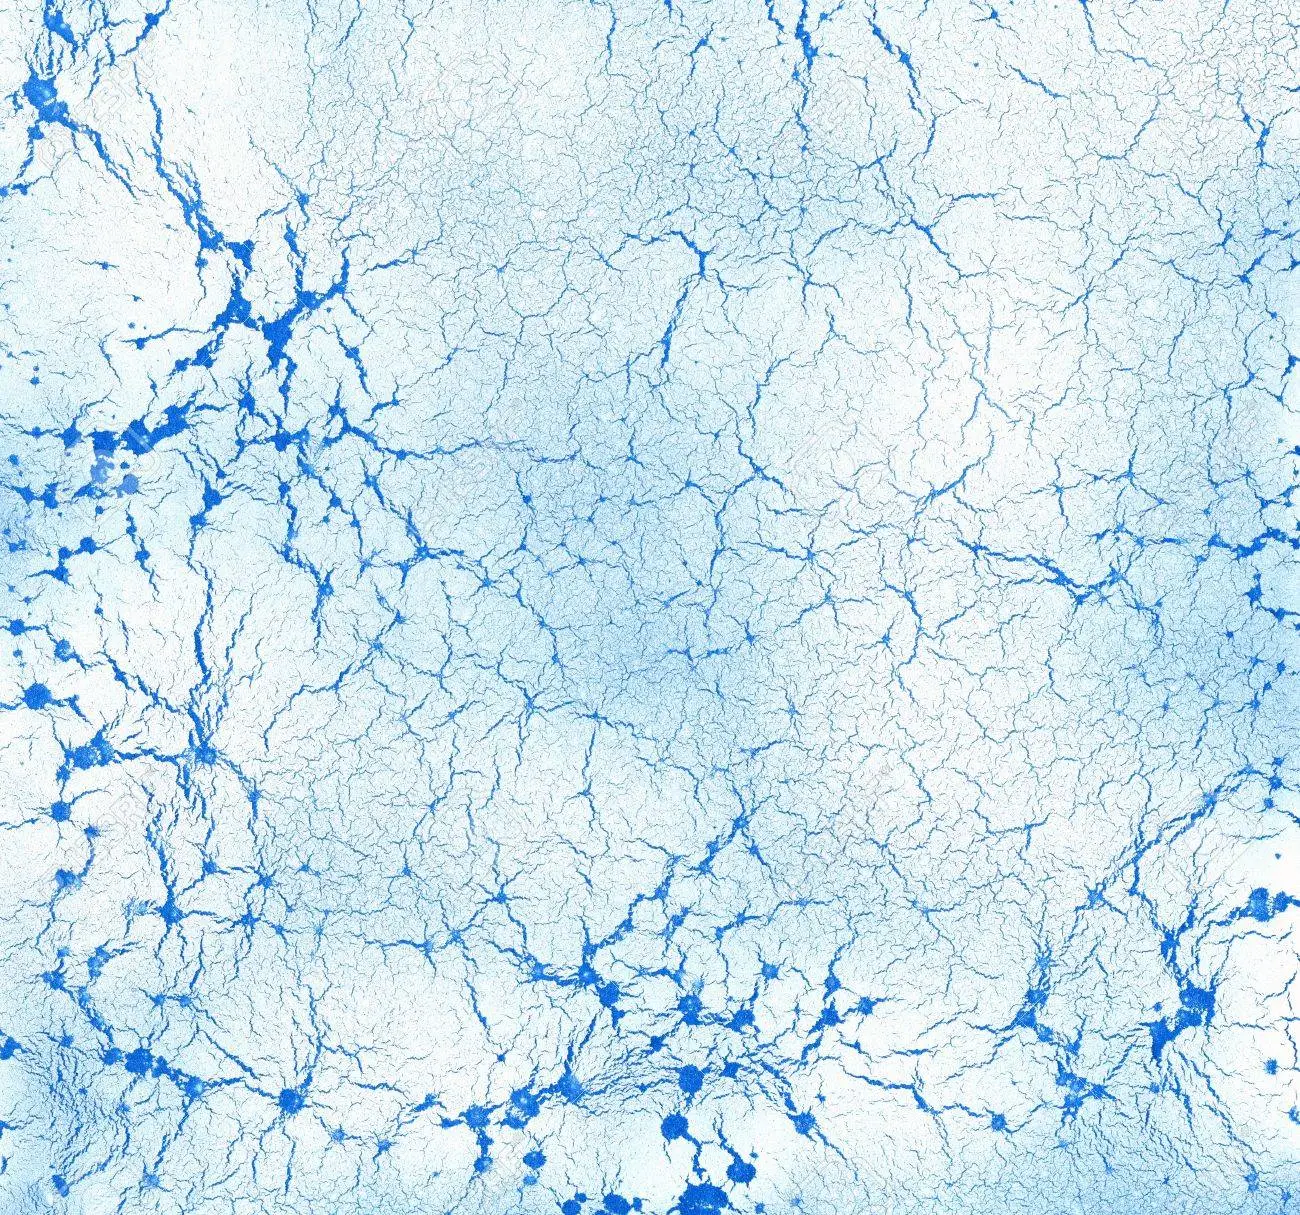 Abstract background fith blue cracks and fissures stock photo picture and royalty free image image